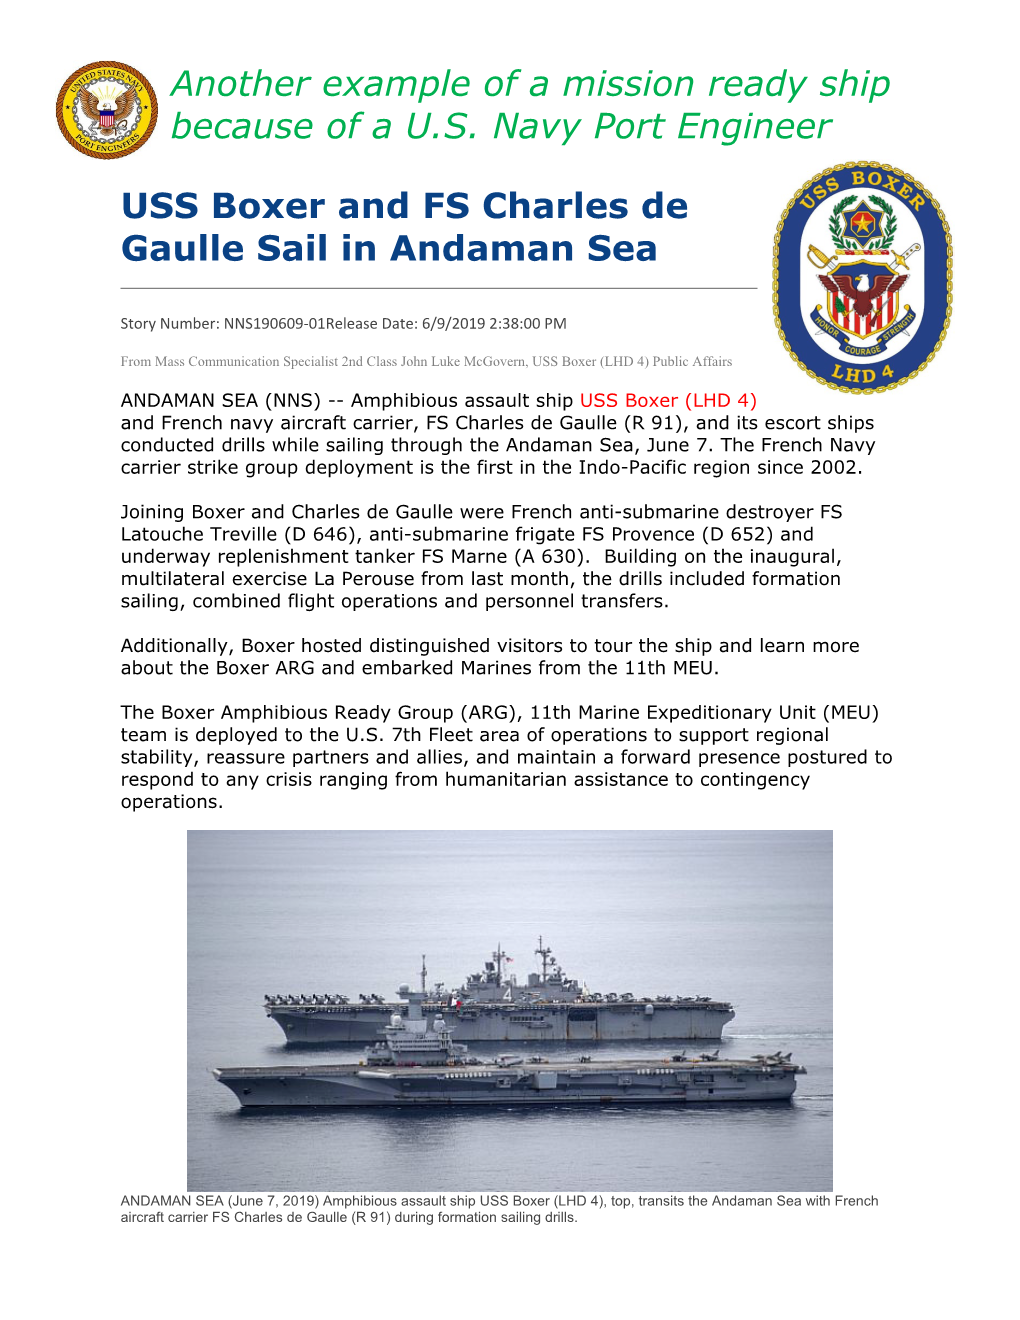 USS Boxer and FS Charles De Gaulle Sail in Andaman Sea